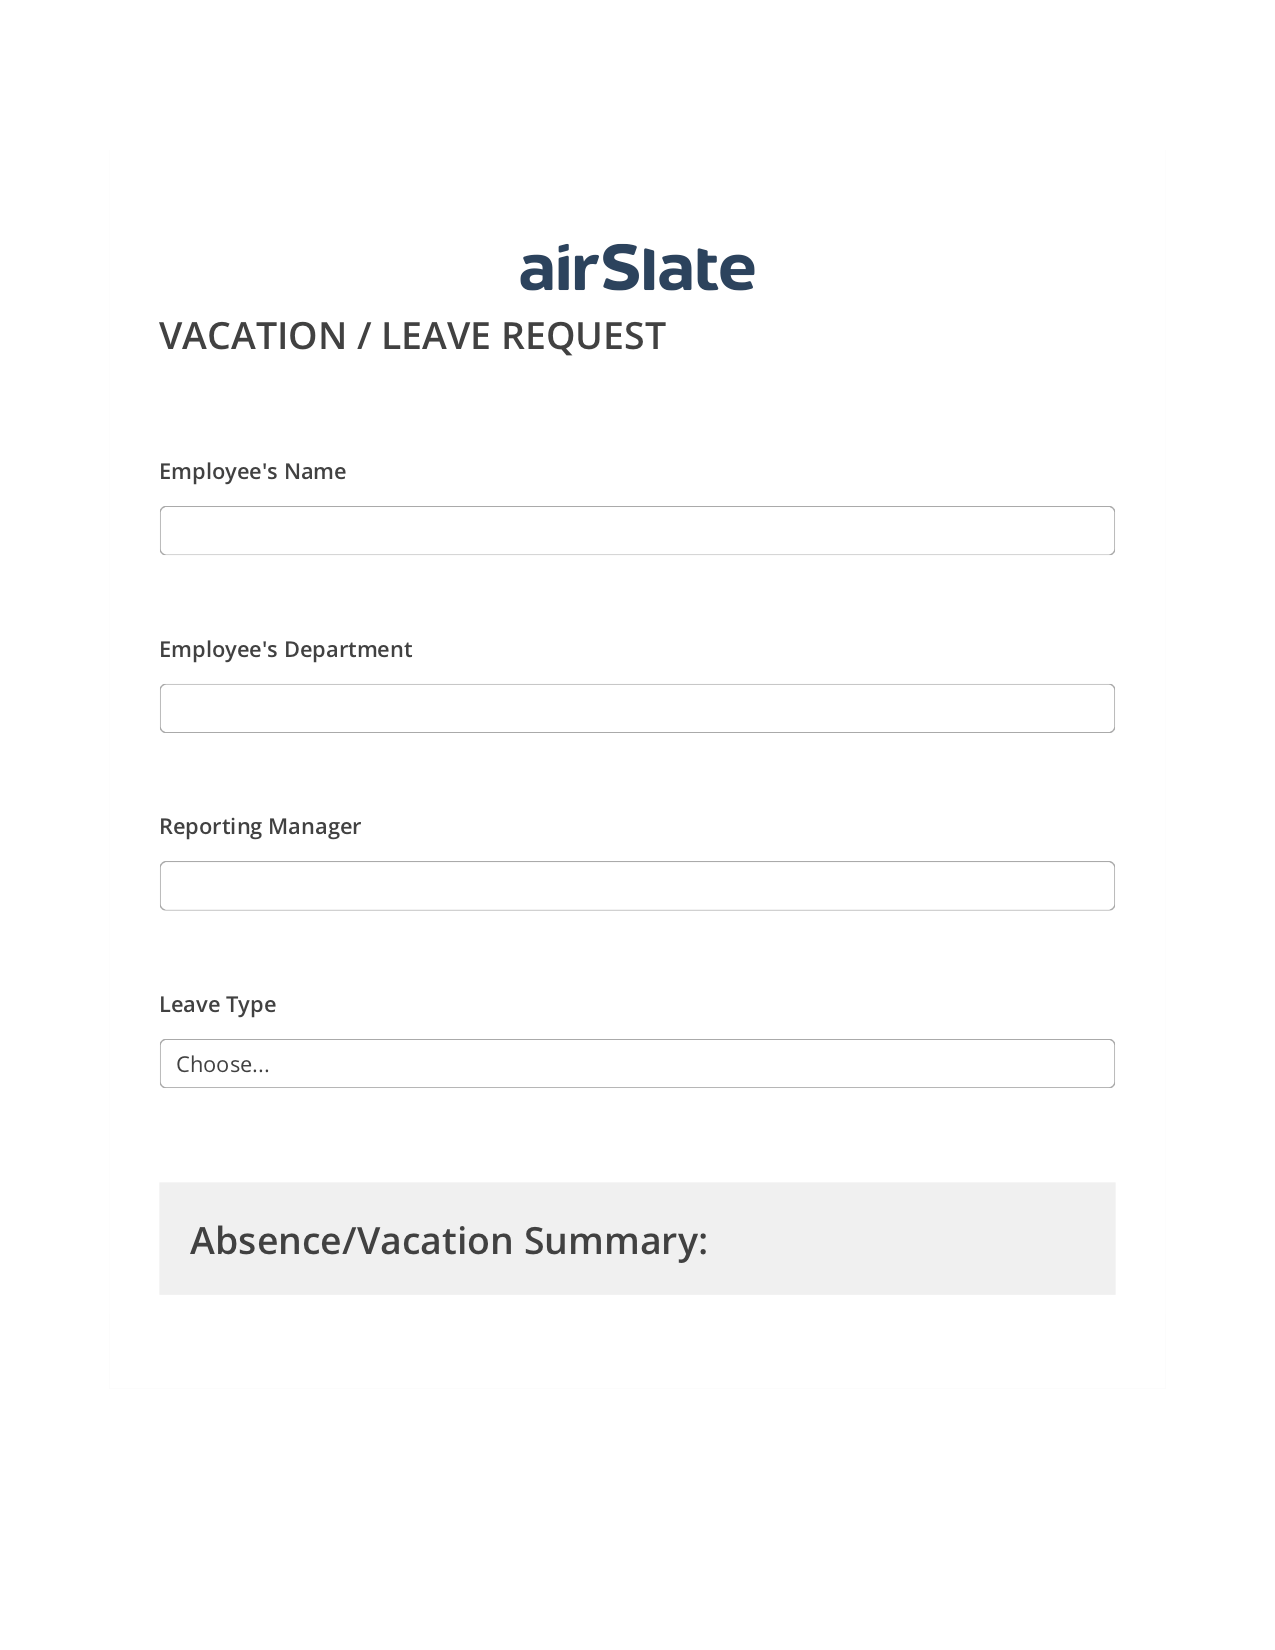 Vacation/Leave Request Workflow Pre-fill from MySQL Bot, Slack Notification Bot, Export to WebMerge Bot